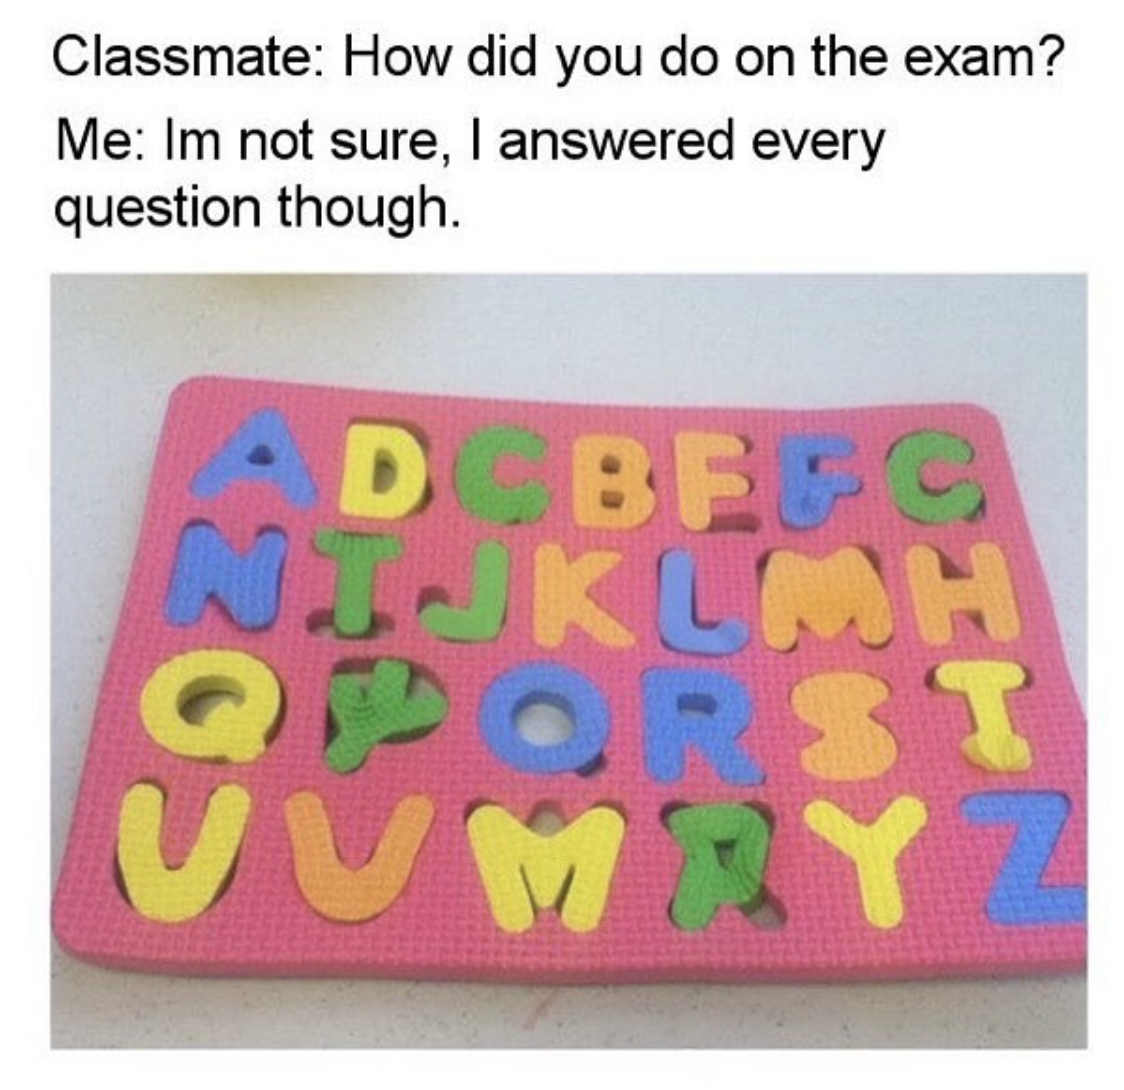 Meme about gauging if you well on a test based on how many questions you answered, with kids alphabet sponge toy all out of order but stuffed forcefully into each shape.